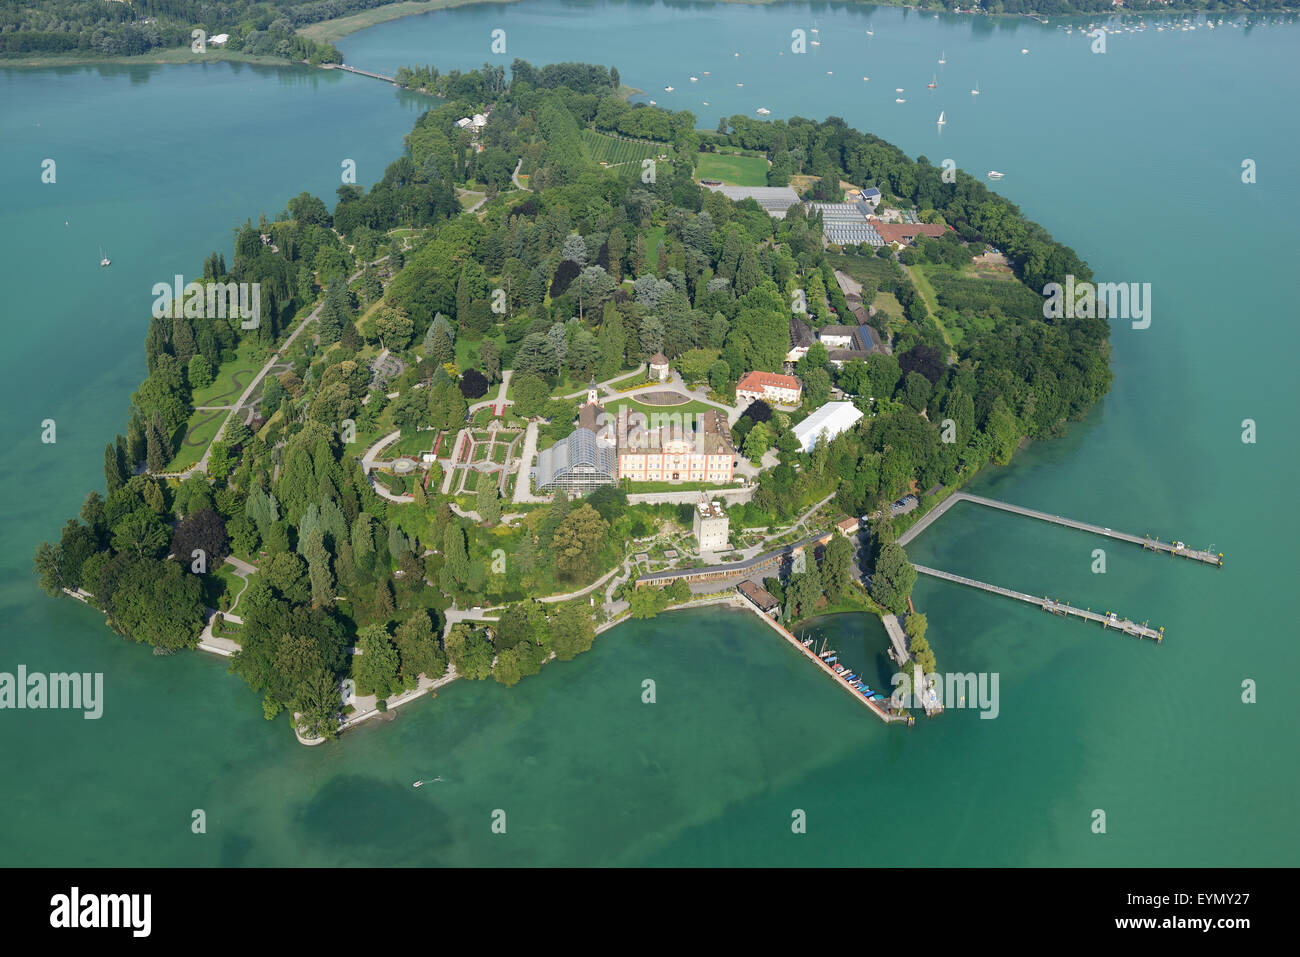 AERIAL VIEW. Mainau Island with its Baroque Castle and arboreal park. Konstanz, Lake Constance or Bodensee in German, Baden-Württemberg, Germany. Stock Photo